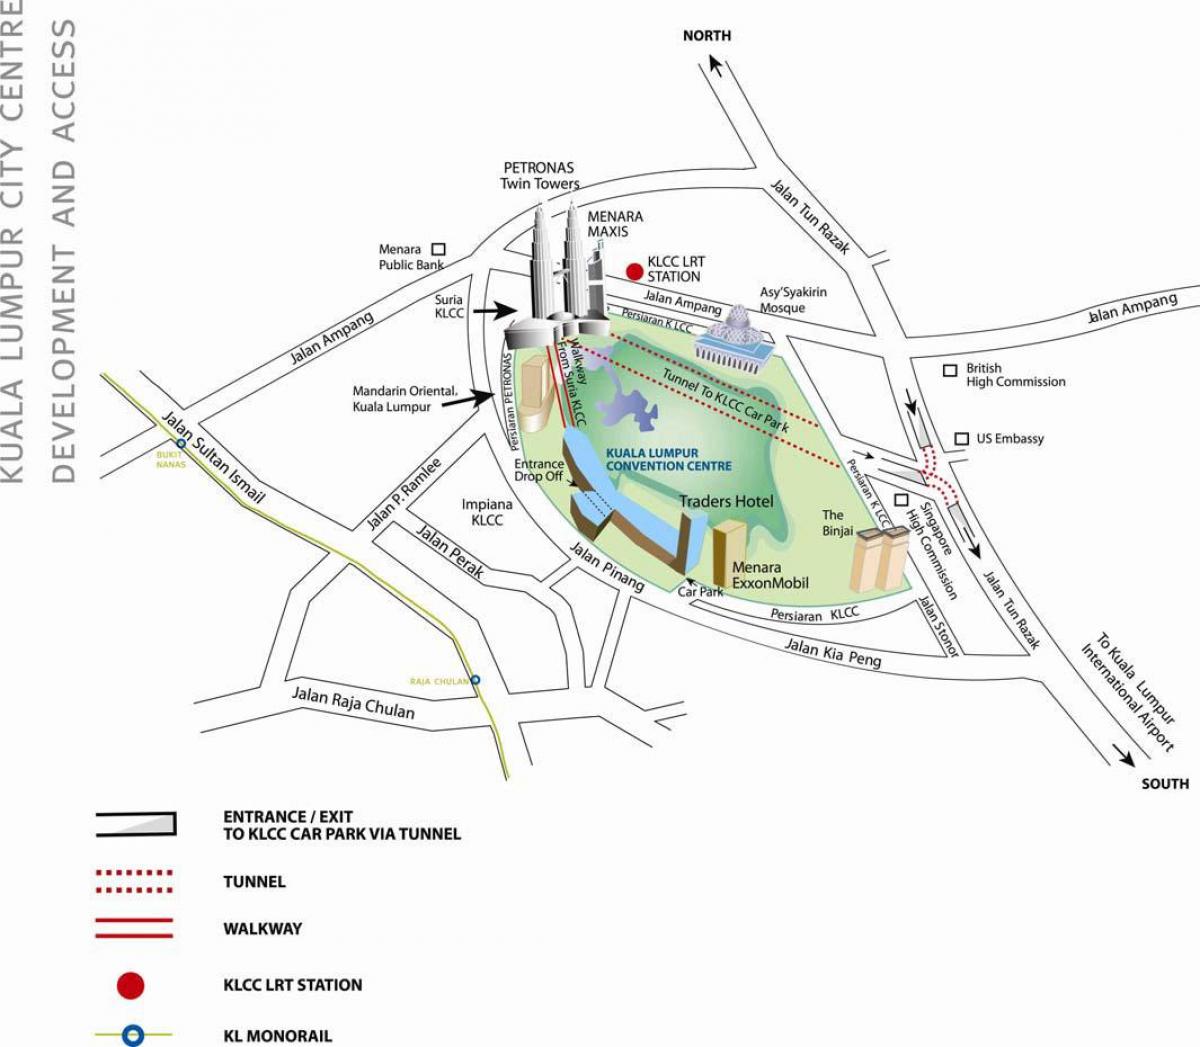 Map of kuala lumpur convention centre